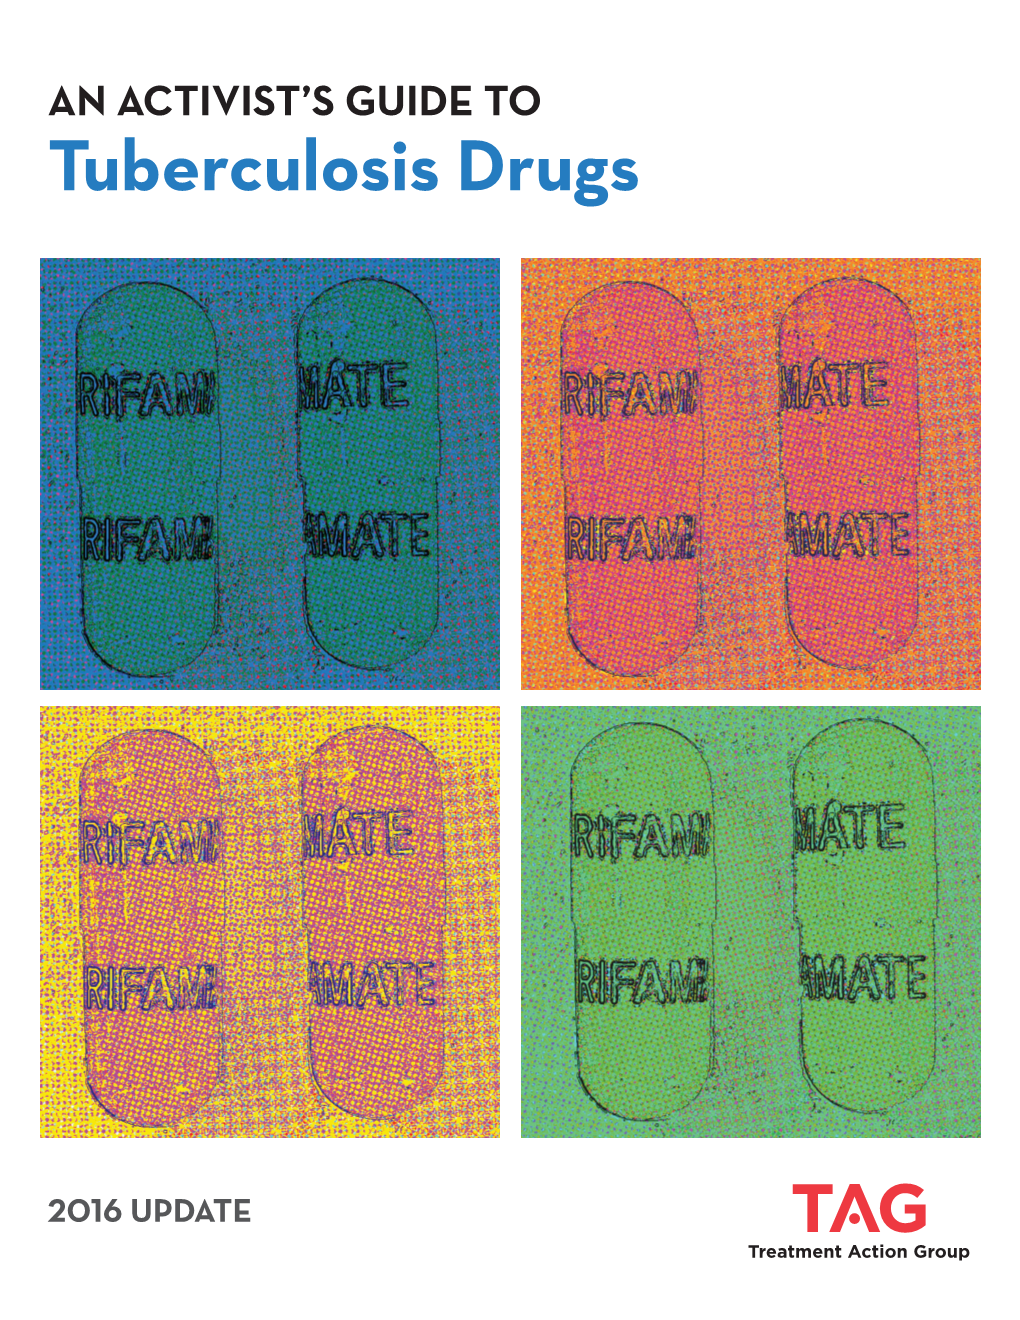 An Activist's Guide to Tuberculosis Drugs 2016 Update